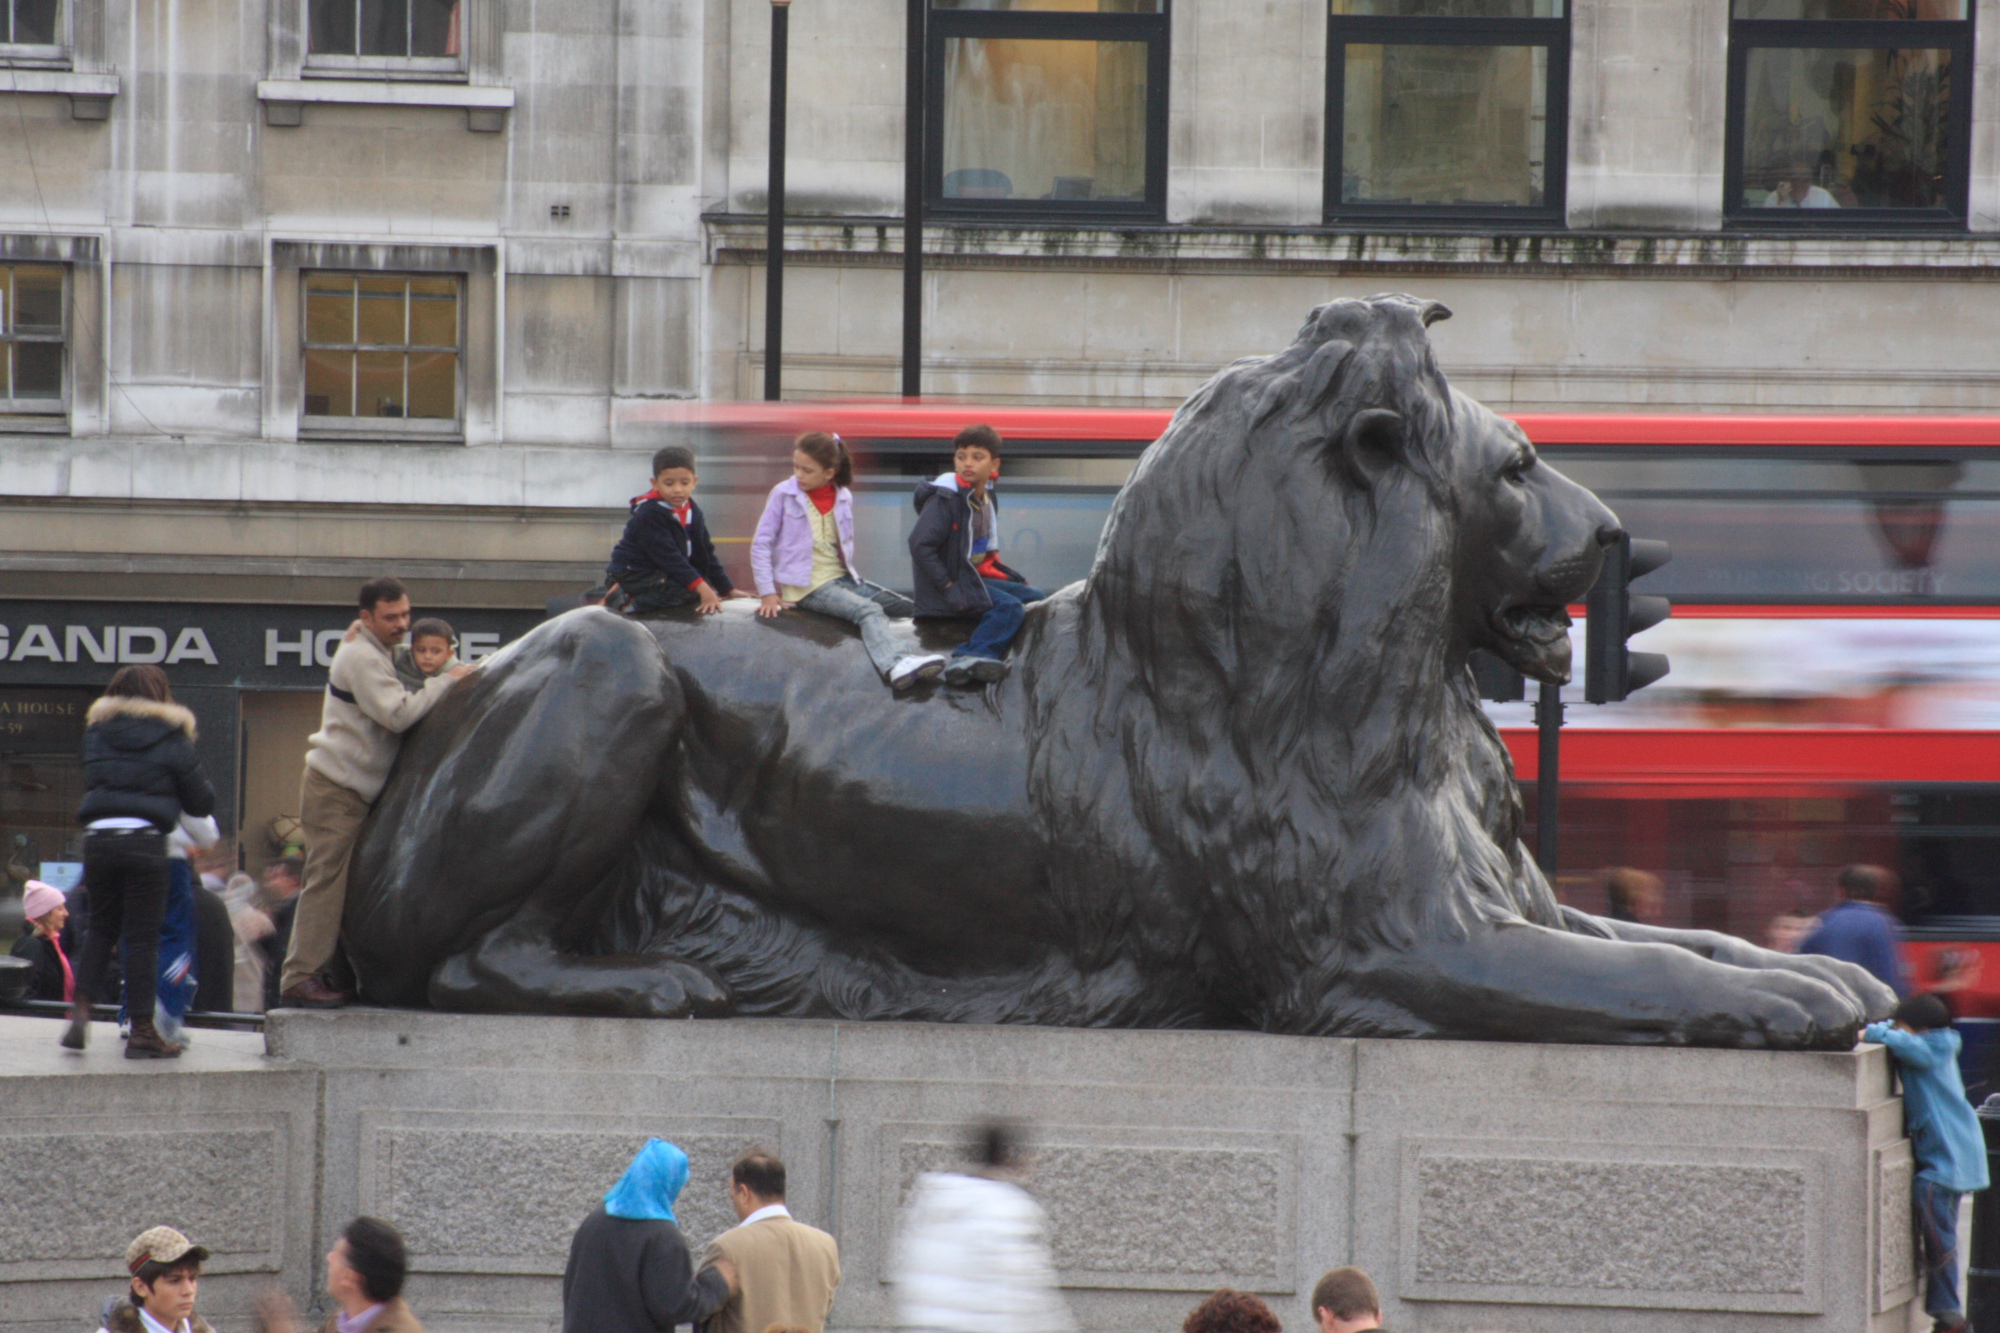 kids on one of the Lions in Trafalgar Square